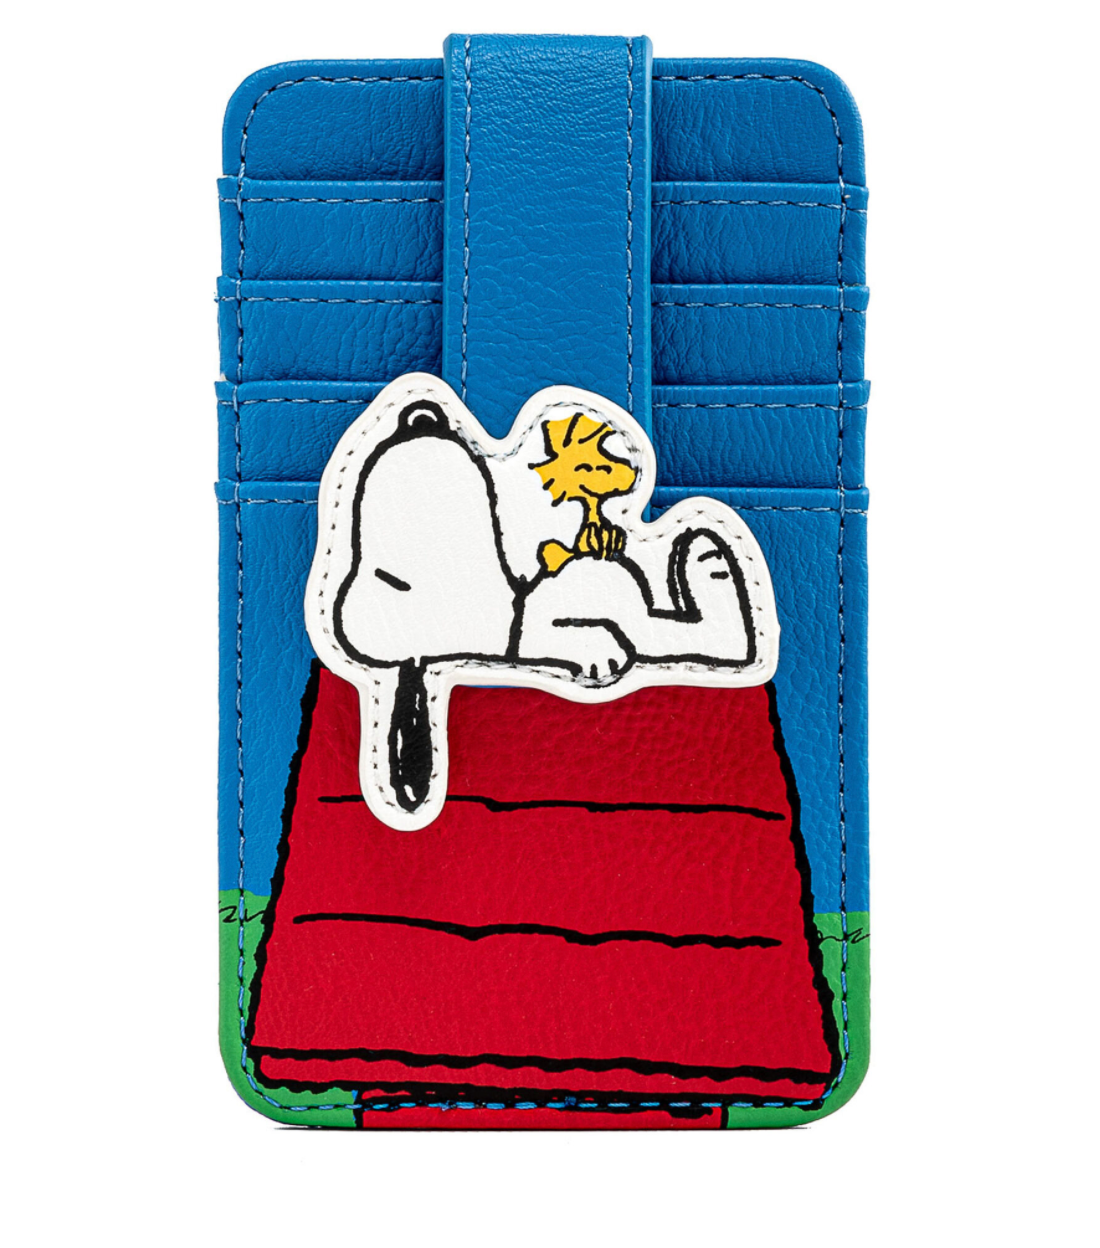 Hallmark Peanuts Snoopy on Doghouse Card Holder New with Tag